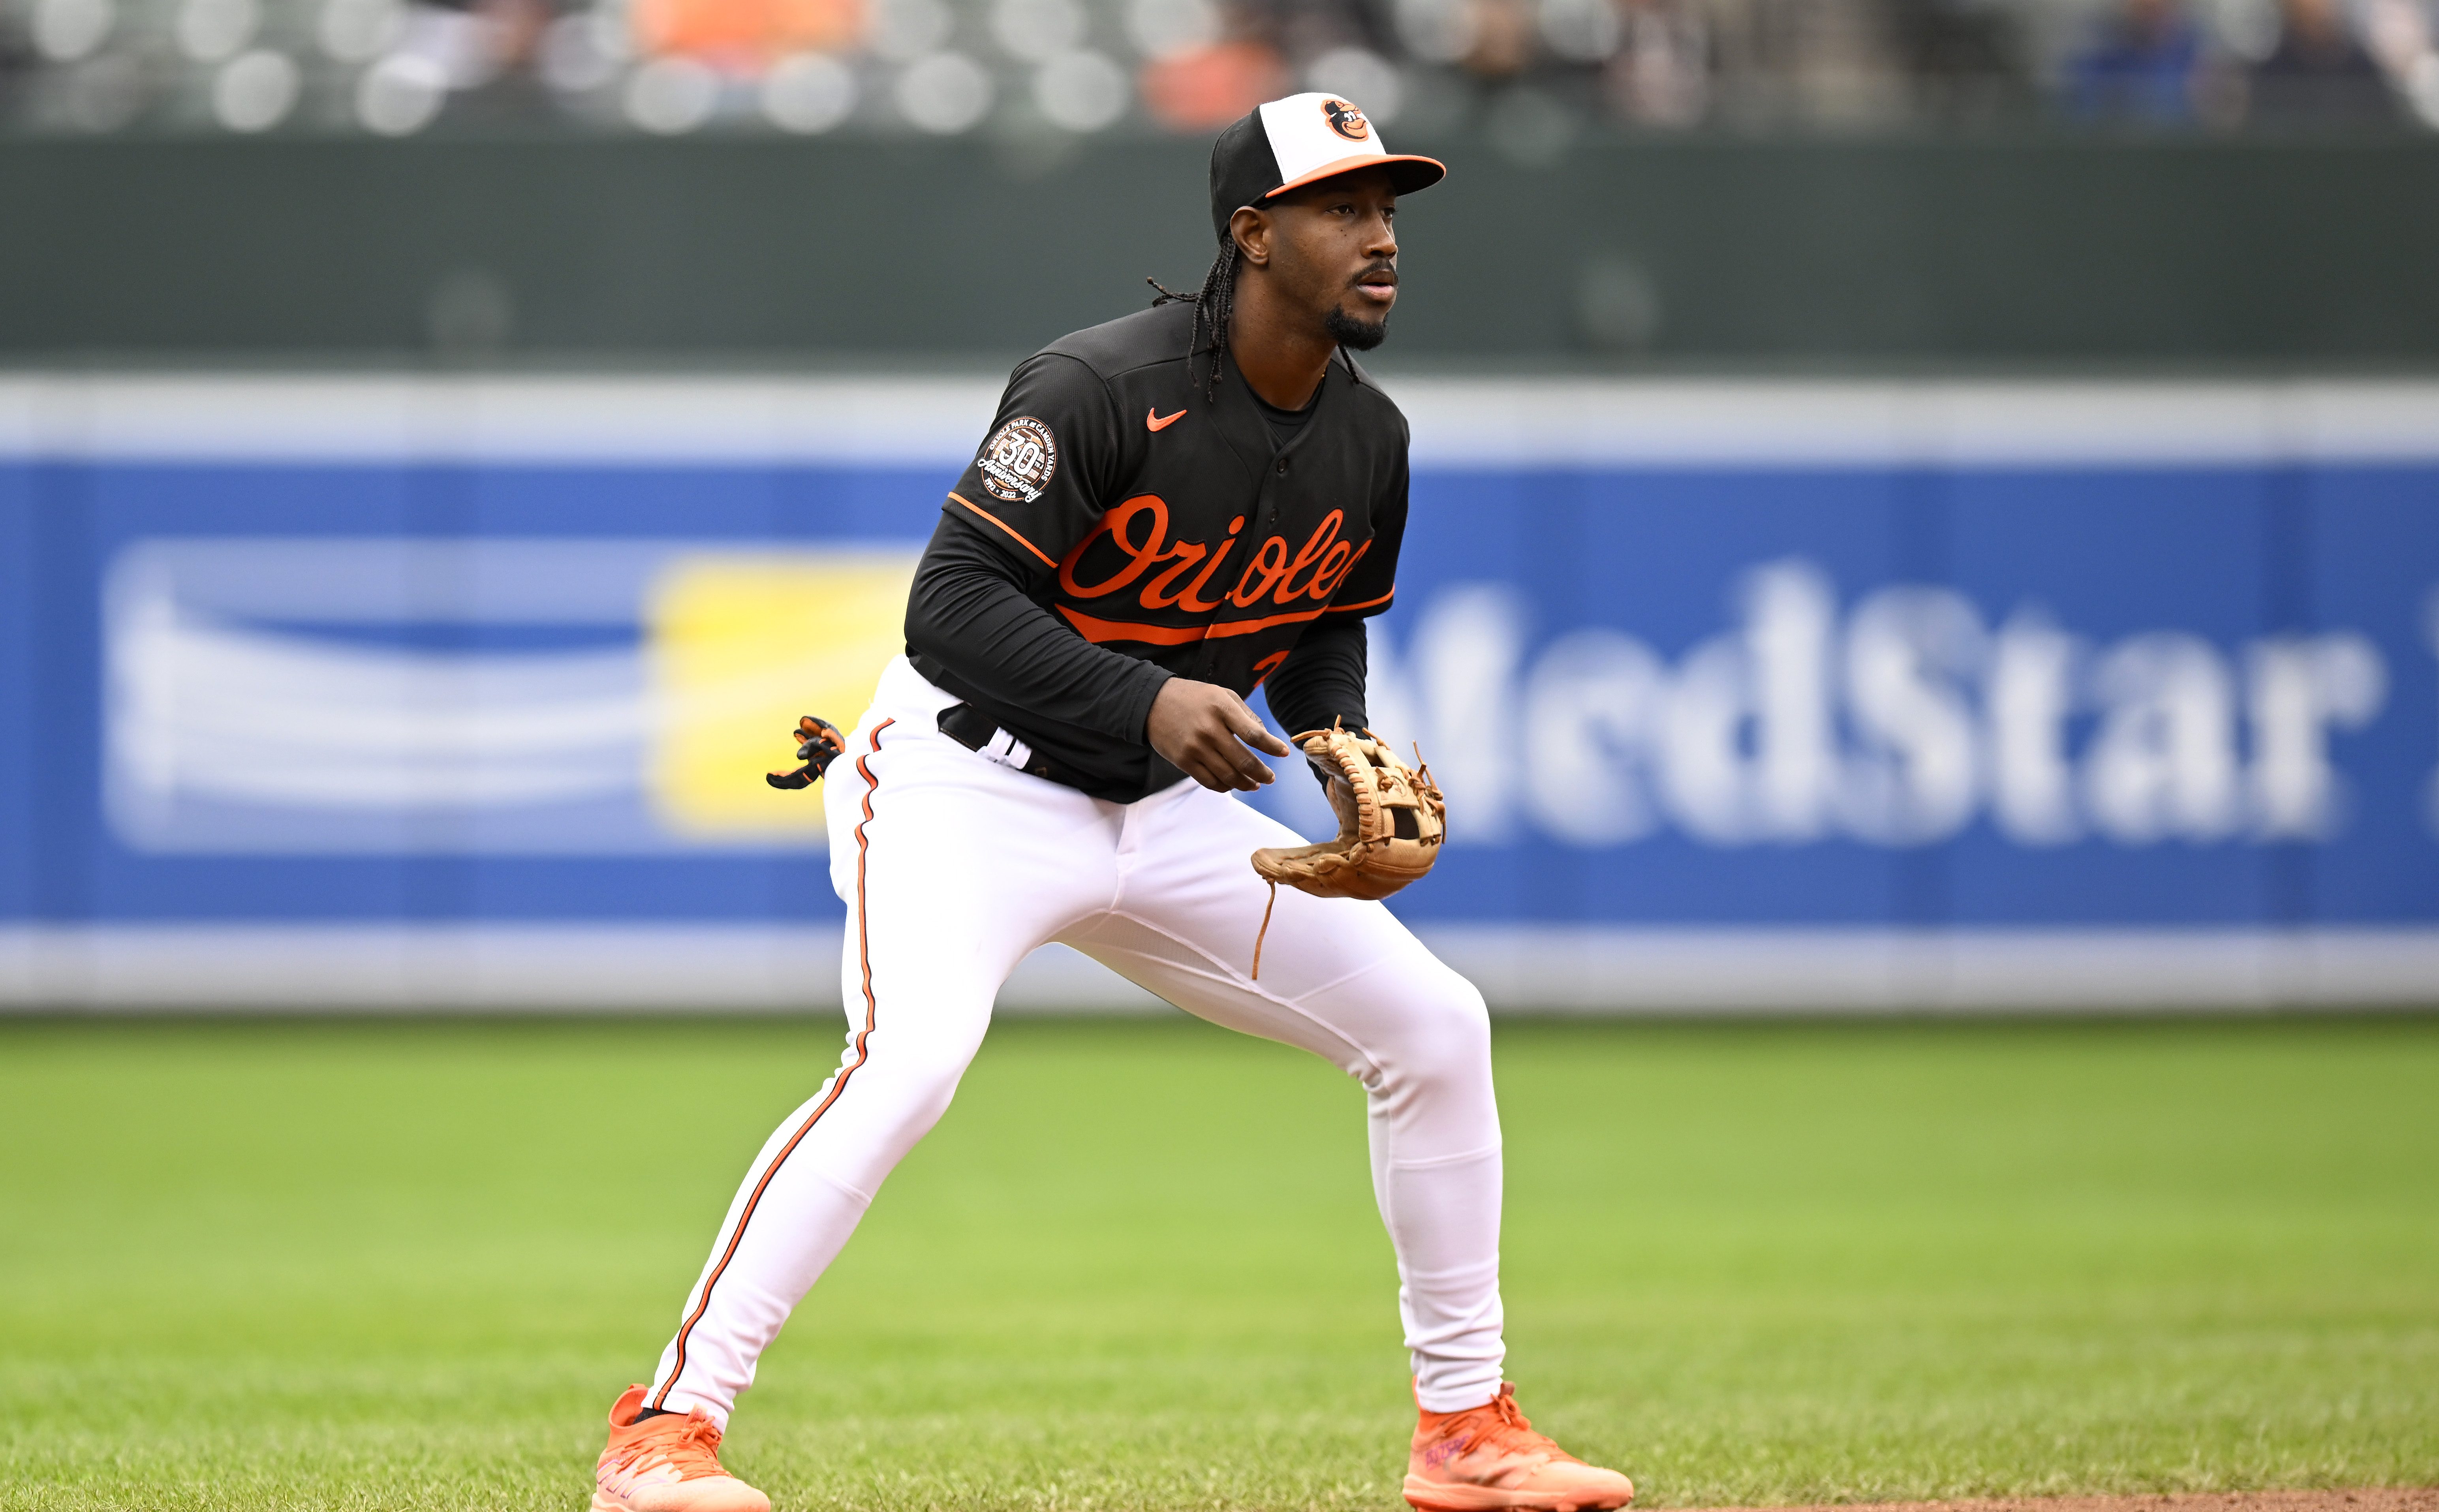 The O's Jorge Mateo takes a spot among the best shortstops in the AL - Blog